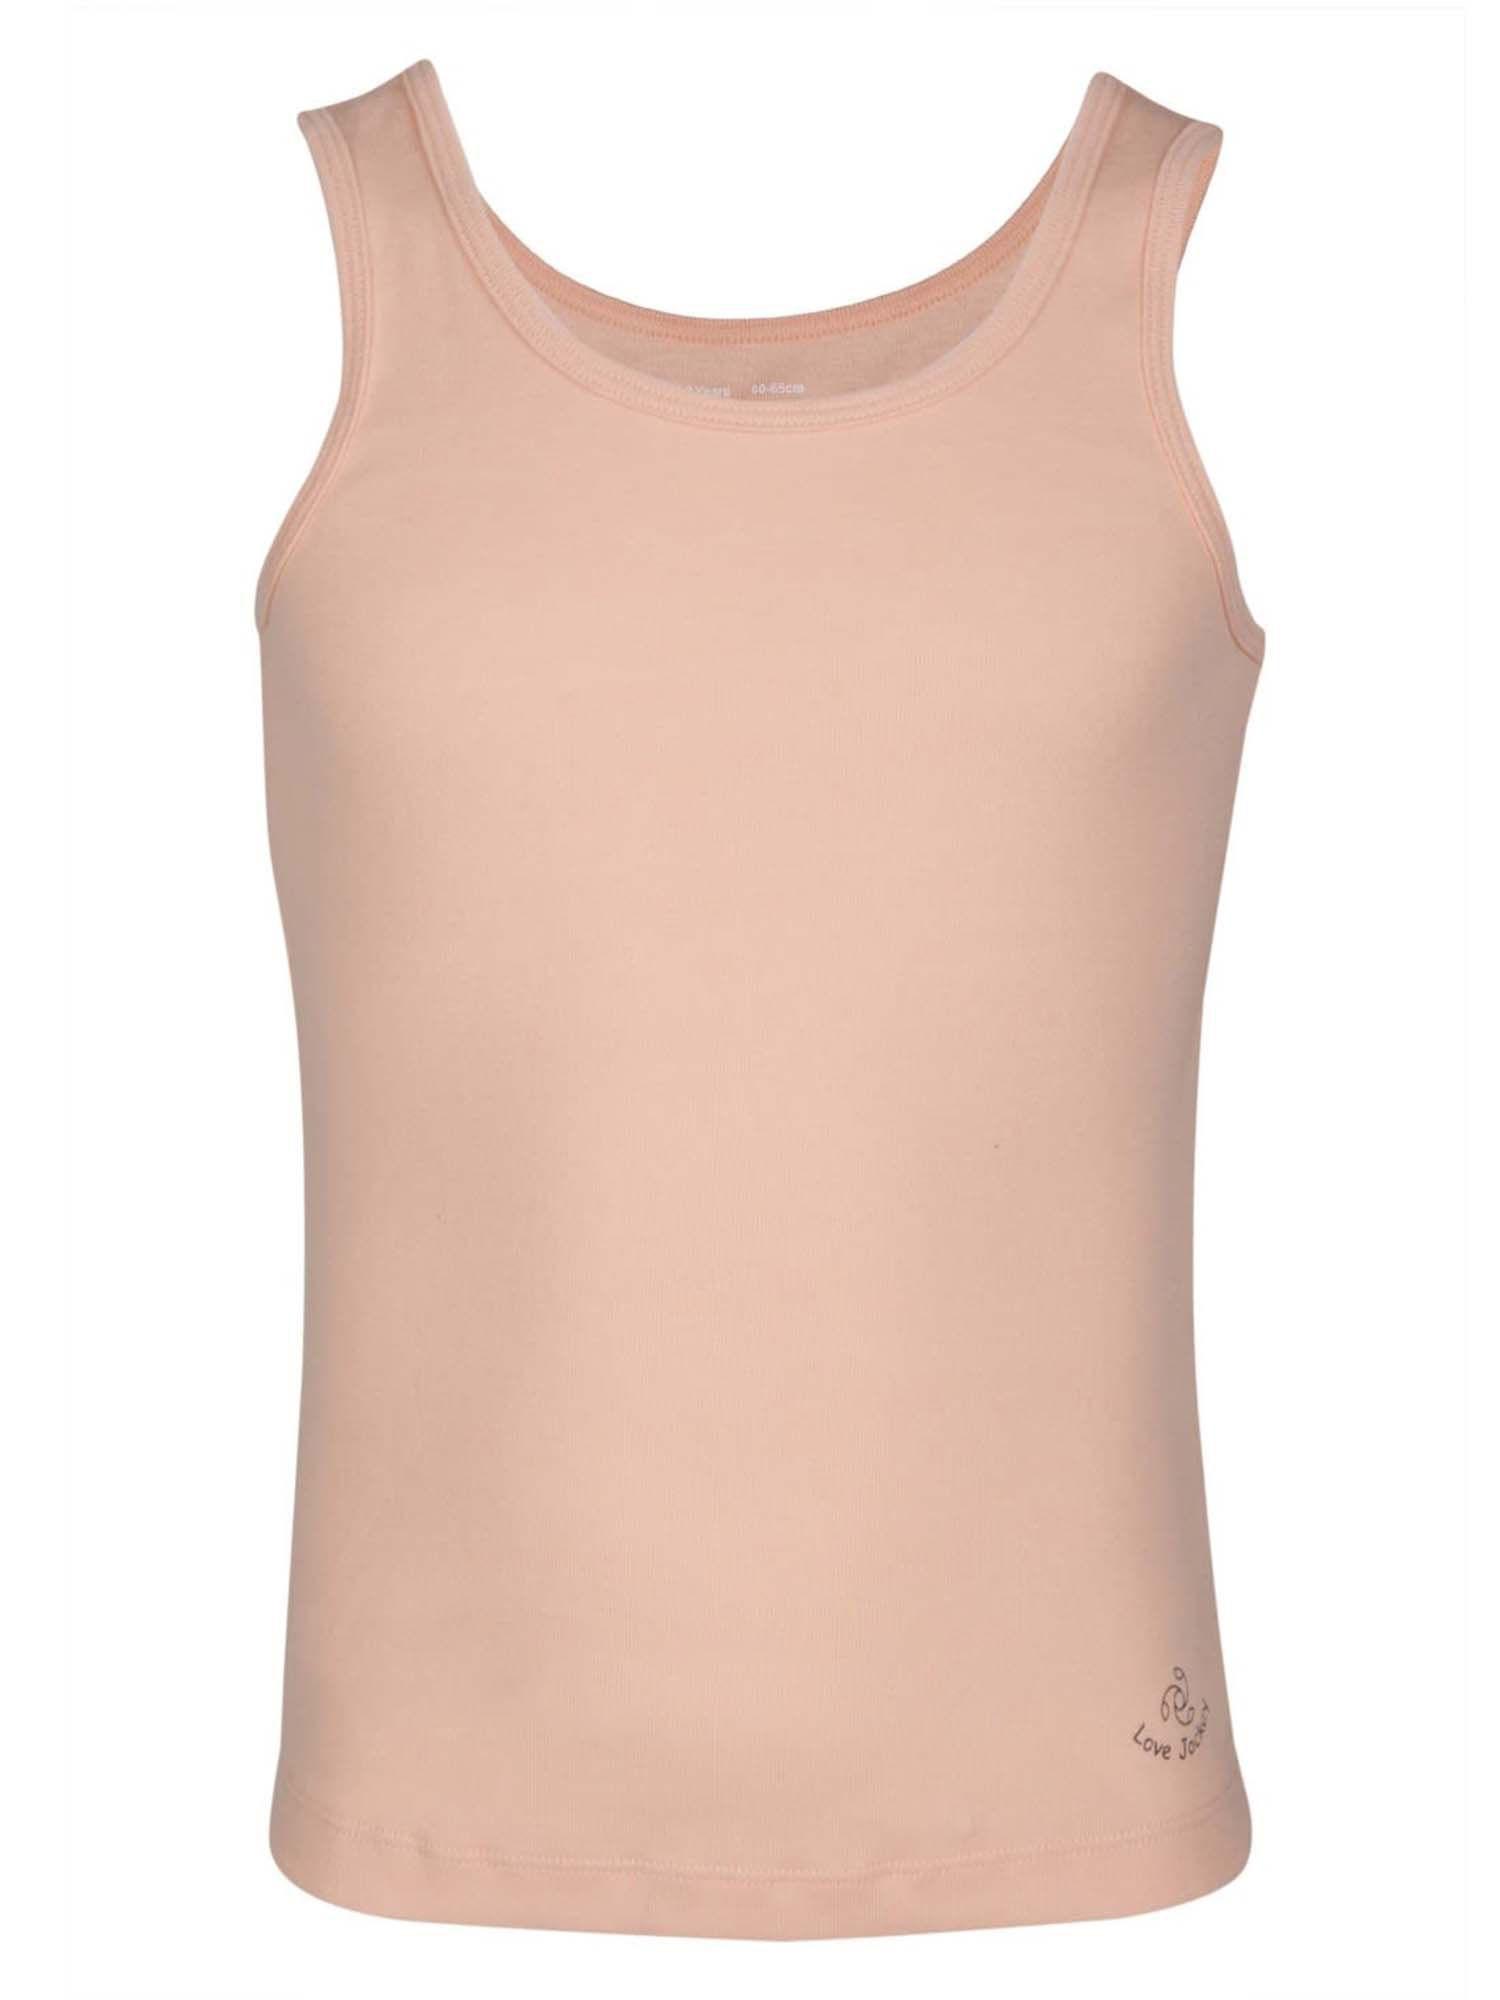 tropical peach girls tank top - style number - (sg02)